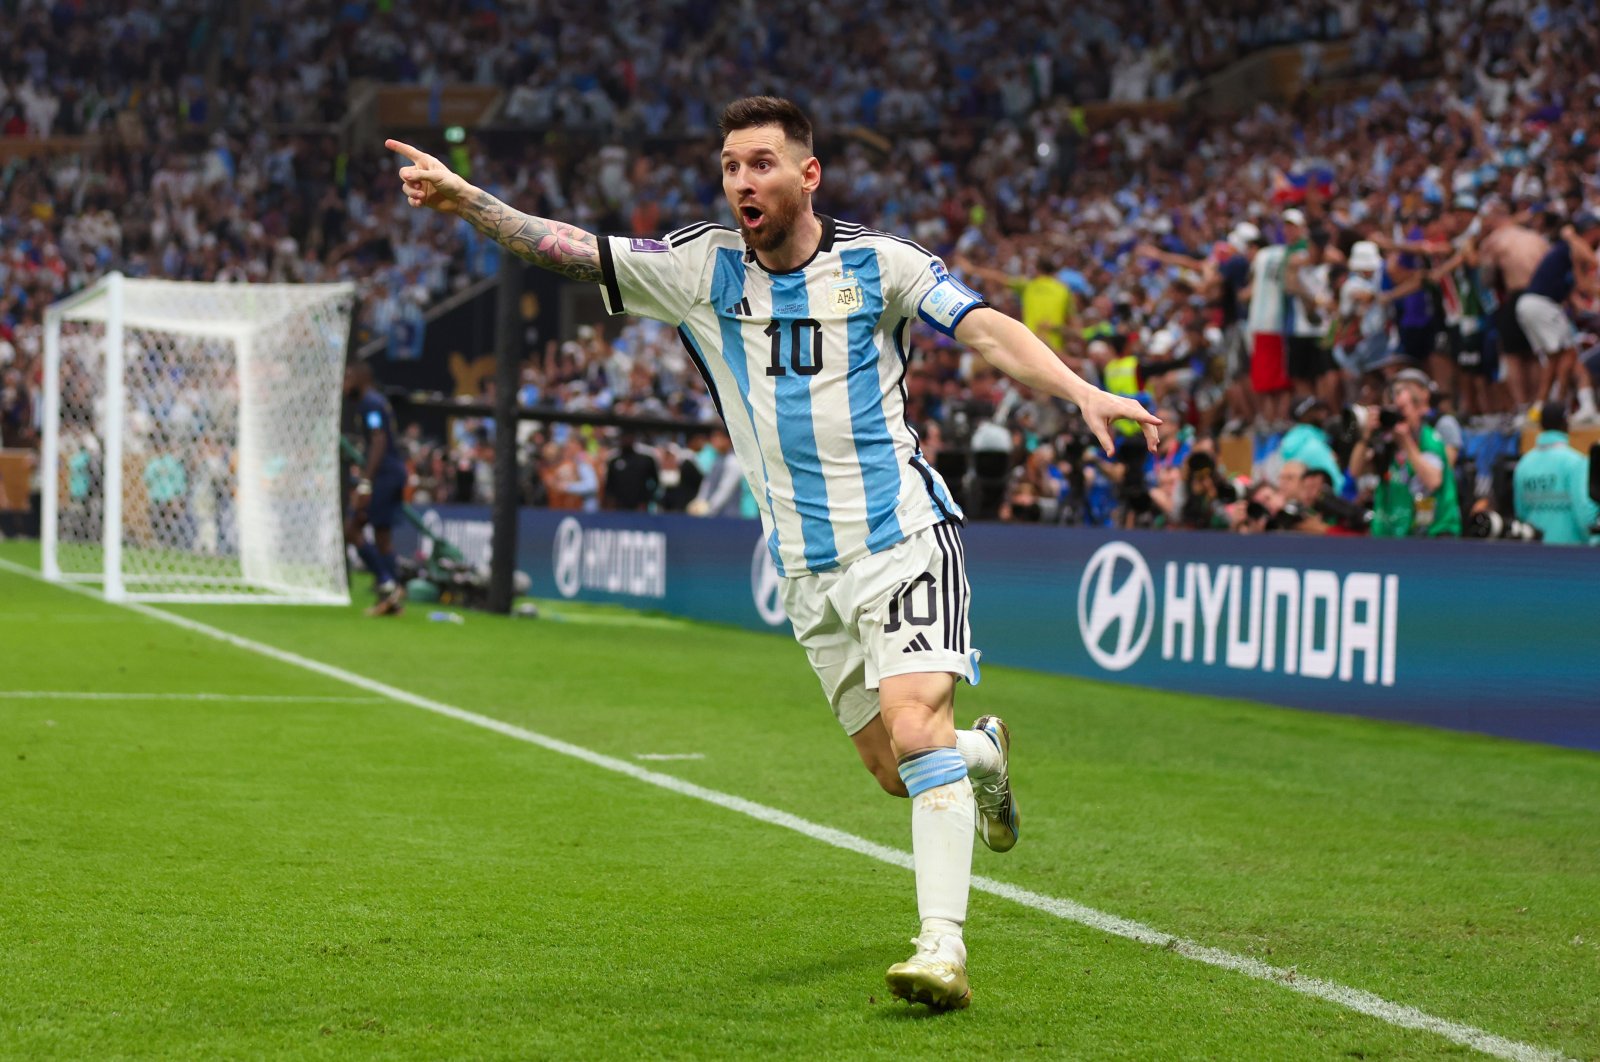 Lionel Messi of Argentina celebrates scoring the 3rd goal during the FIFA World Cup Qatar 2022 Final match between Argentina and France at Lusail Stadium, Lusail City, Qatar, Dec. 18, 2022. (Photo by Marc Atkins/Getty Images)